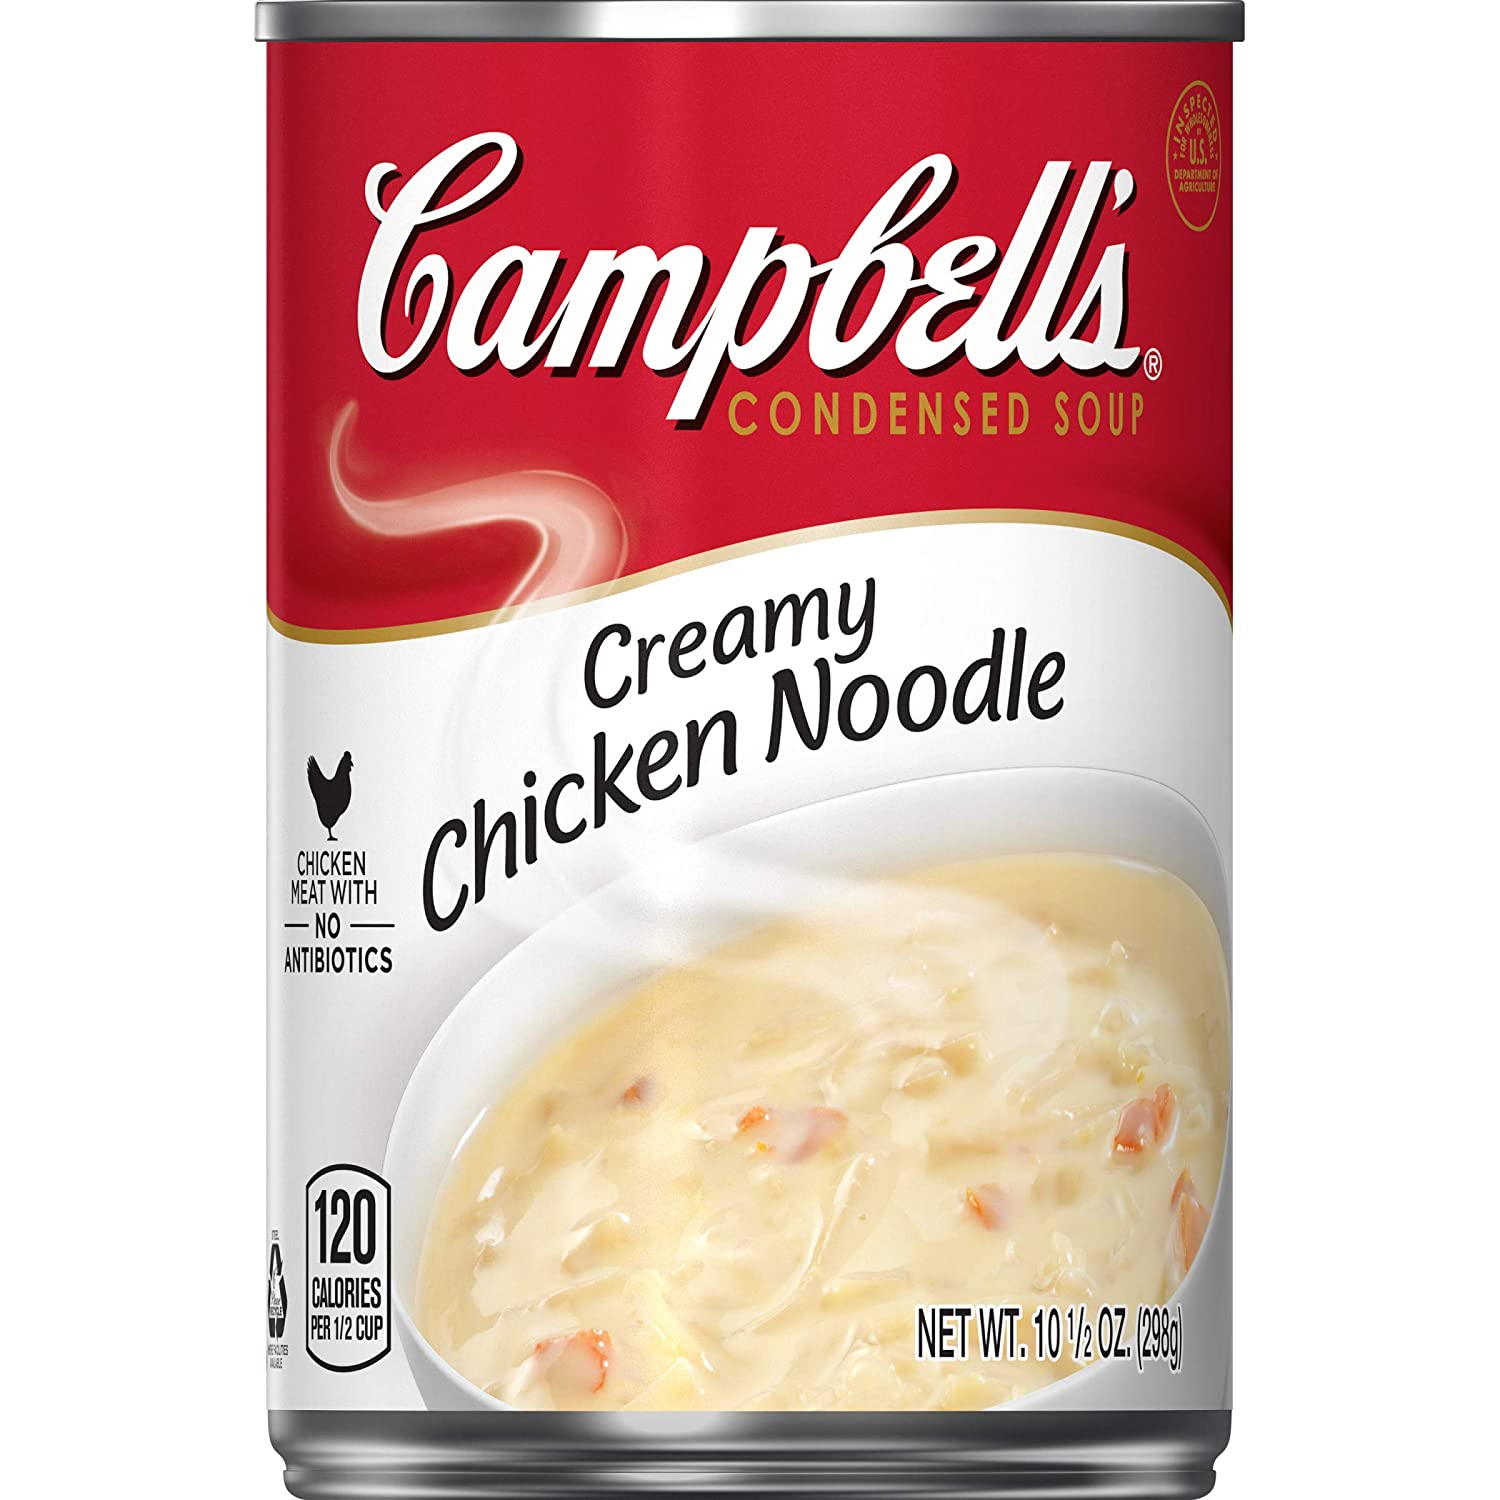 Campbells creamy chicken noodle soup recipe akzamkowy.org